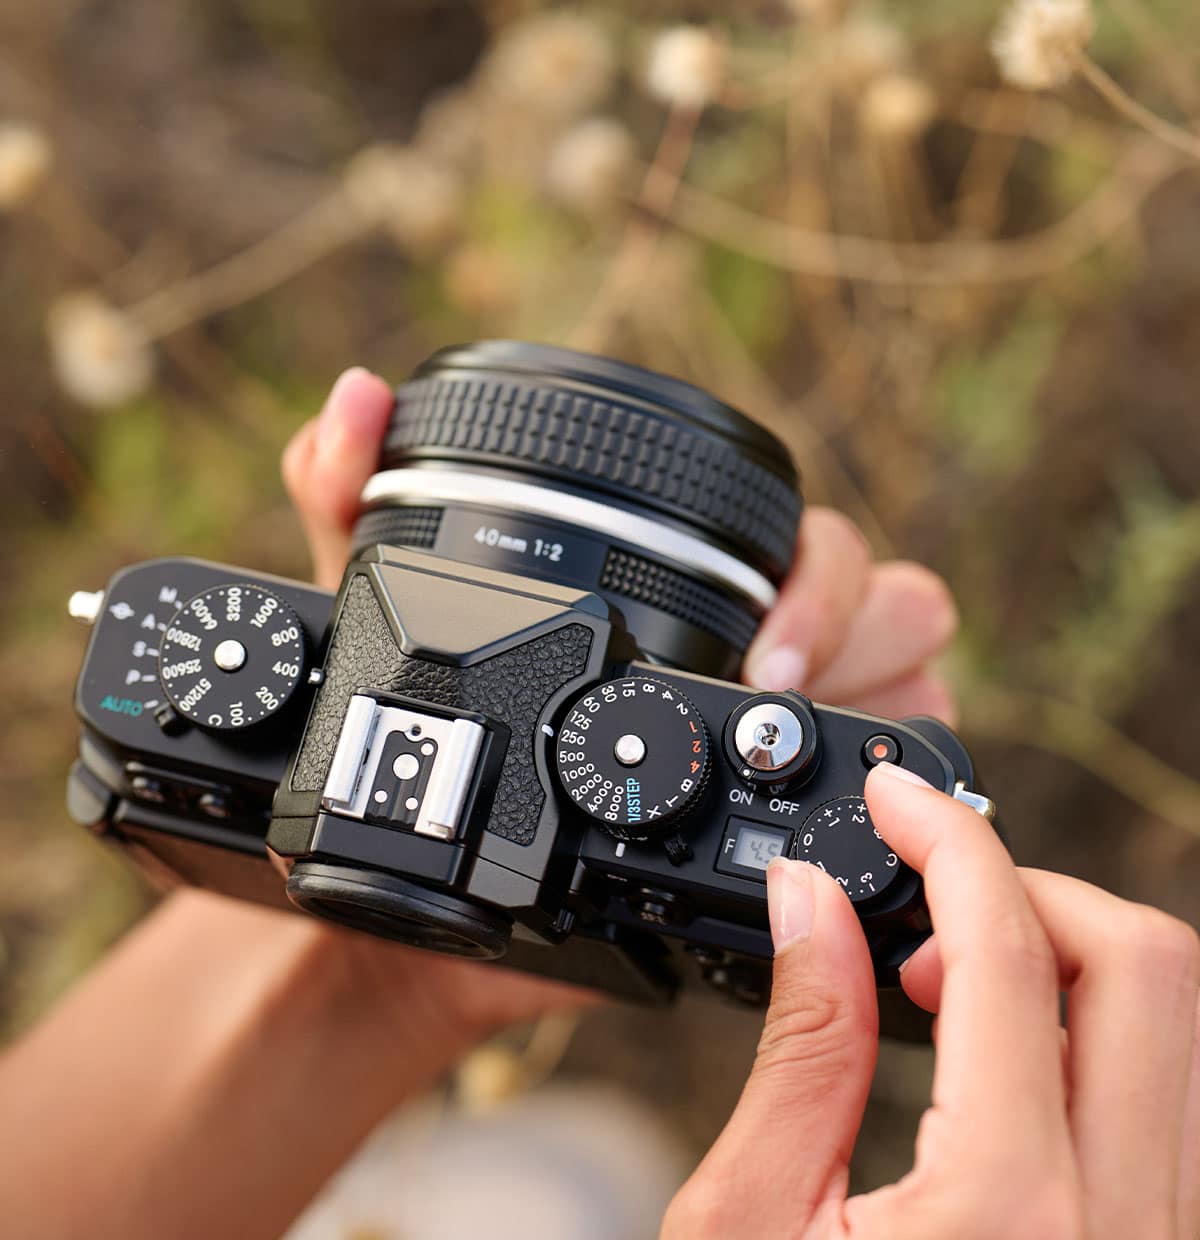 Photo of a person's hands holding a Z f camera and changing dials on the top of the camera body